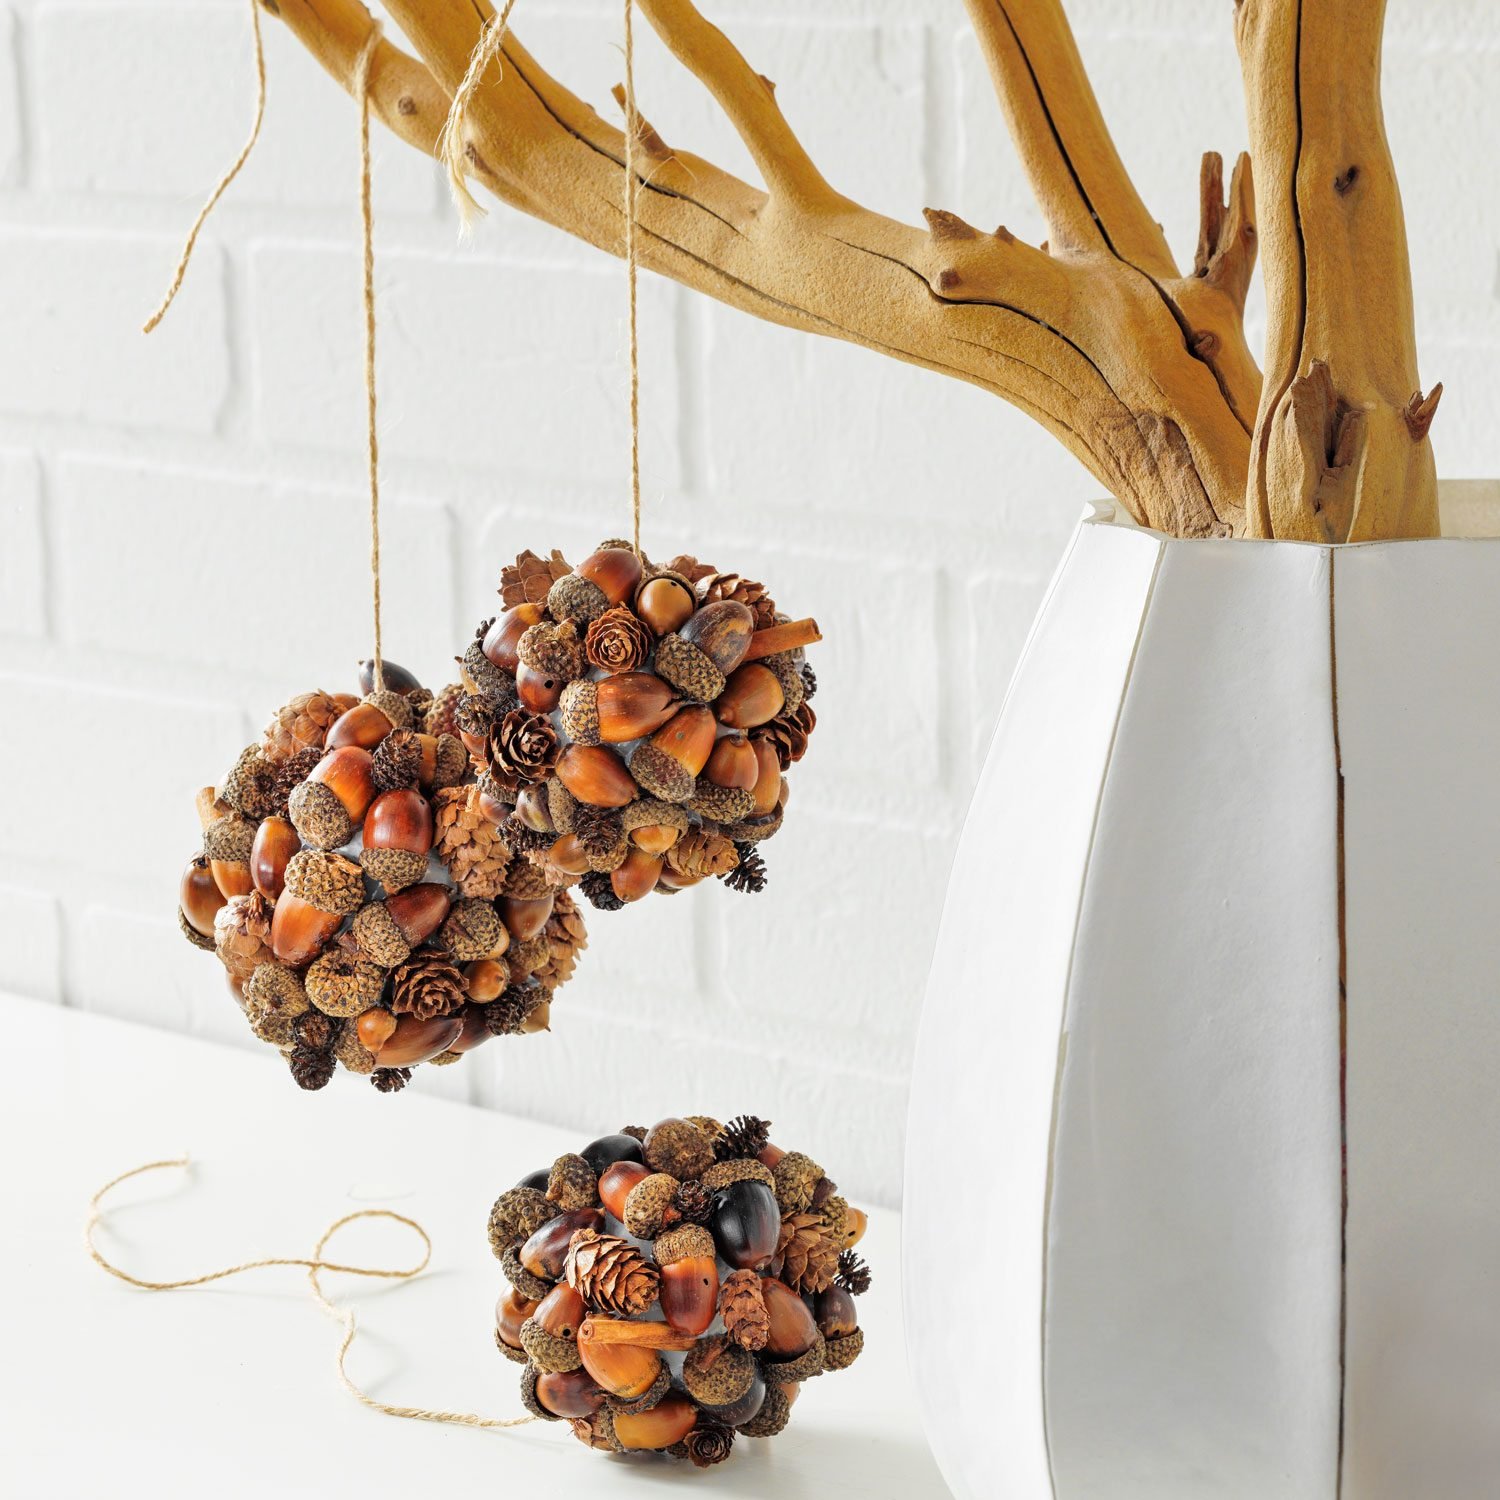 Acorn Baubles Hanging on a Painted Branch in a Fancy White Vace